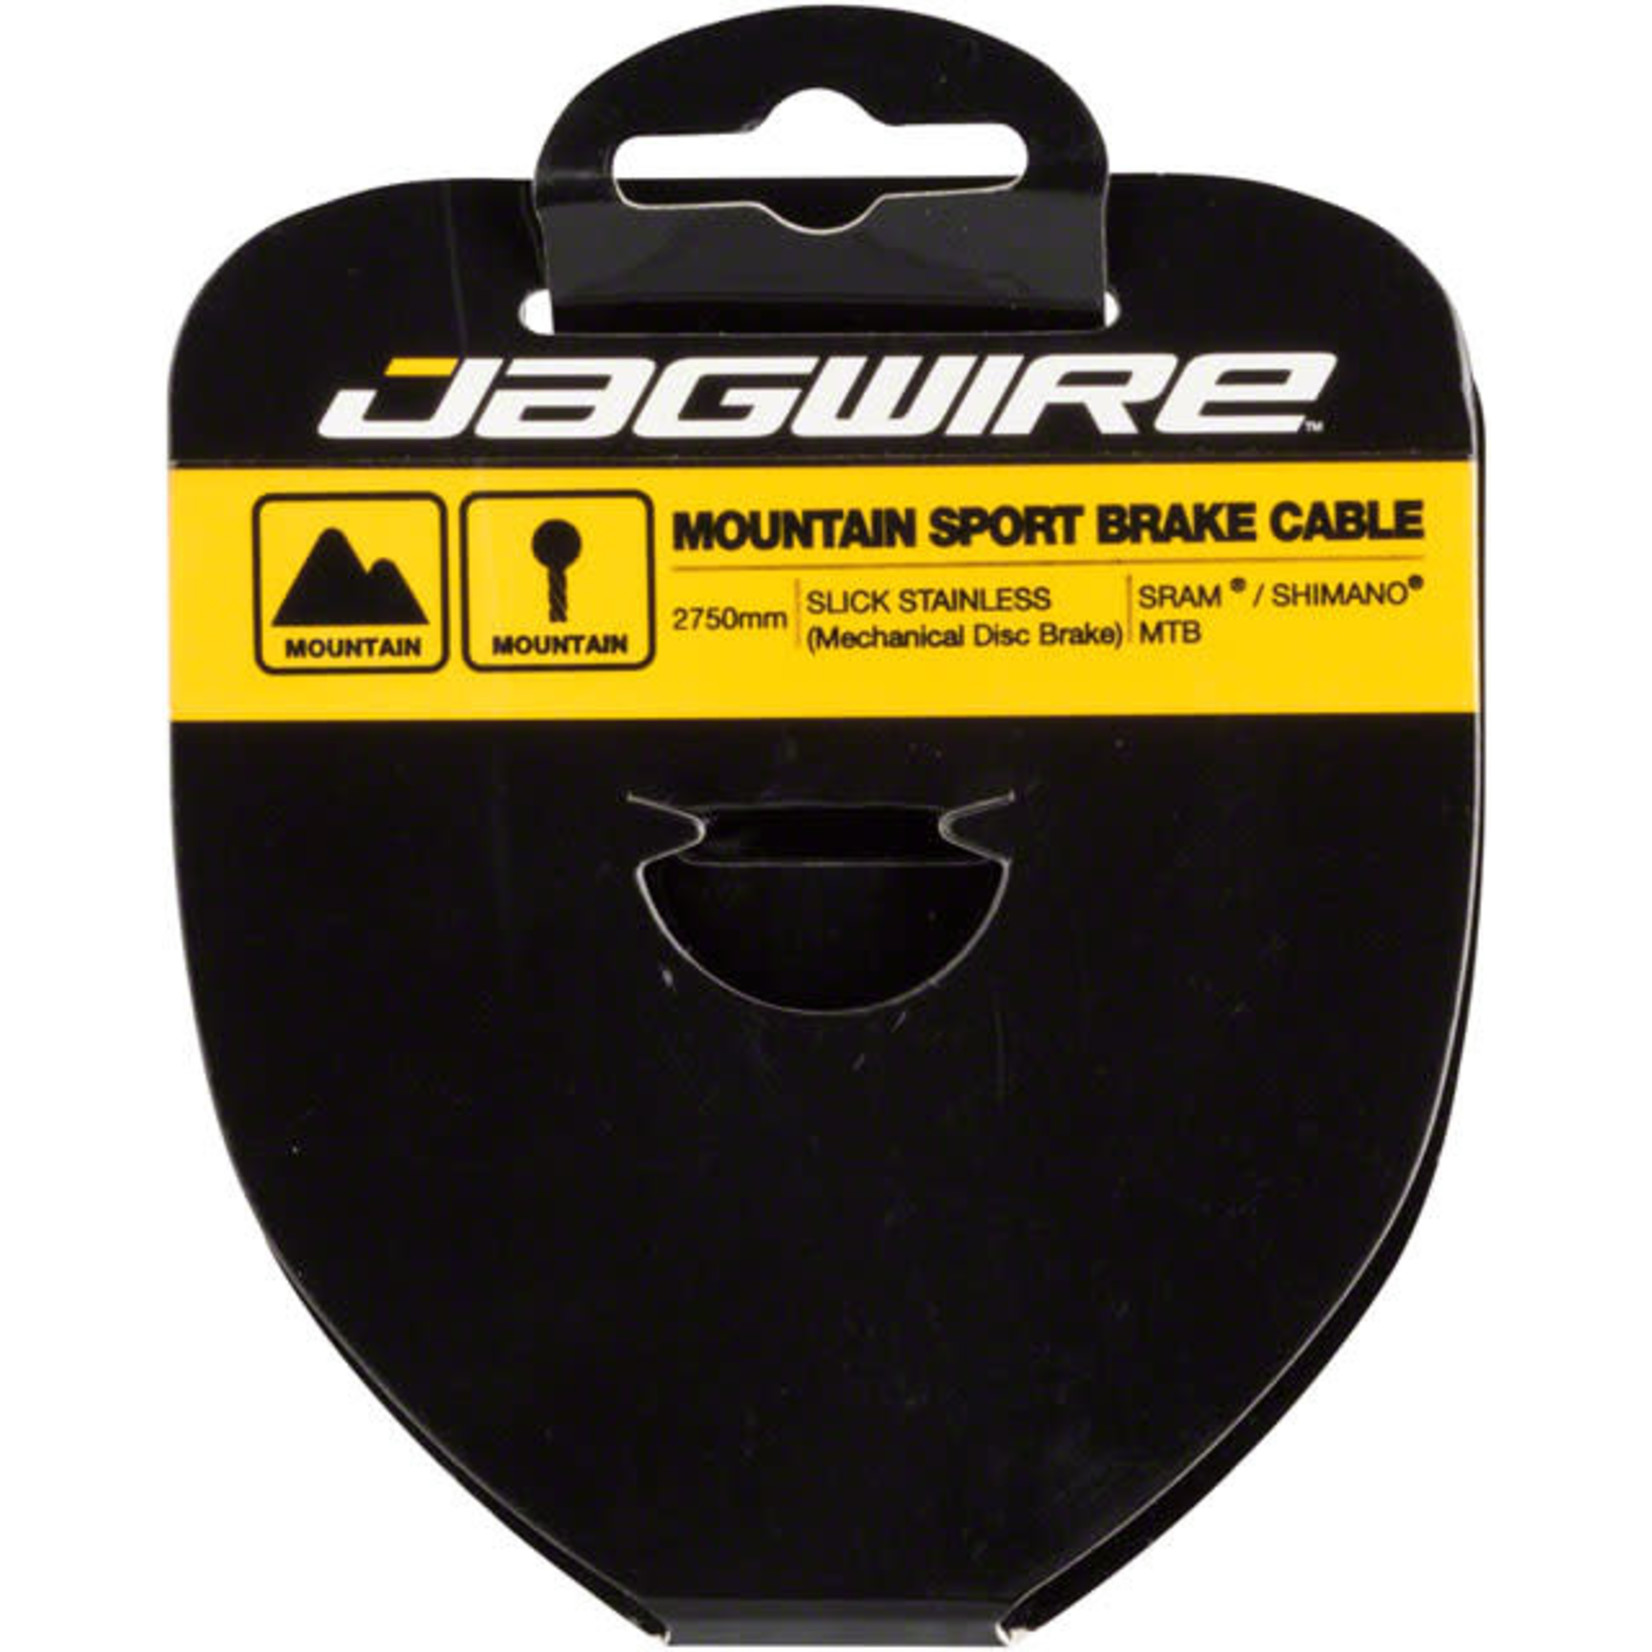 Jagwire Jagwire Sport Brake Cable Slick Stainless 1.5x2750mm SRAM/Shimano Mountain Tandem